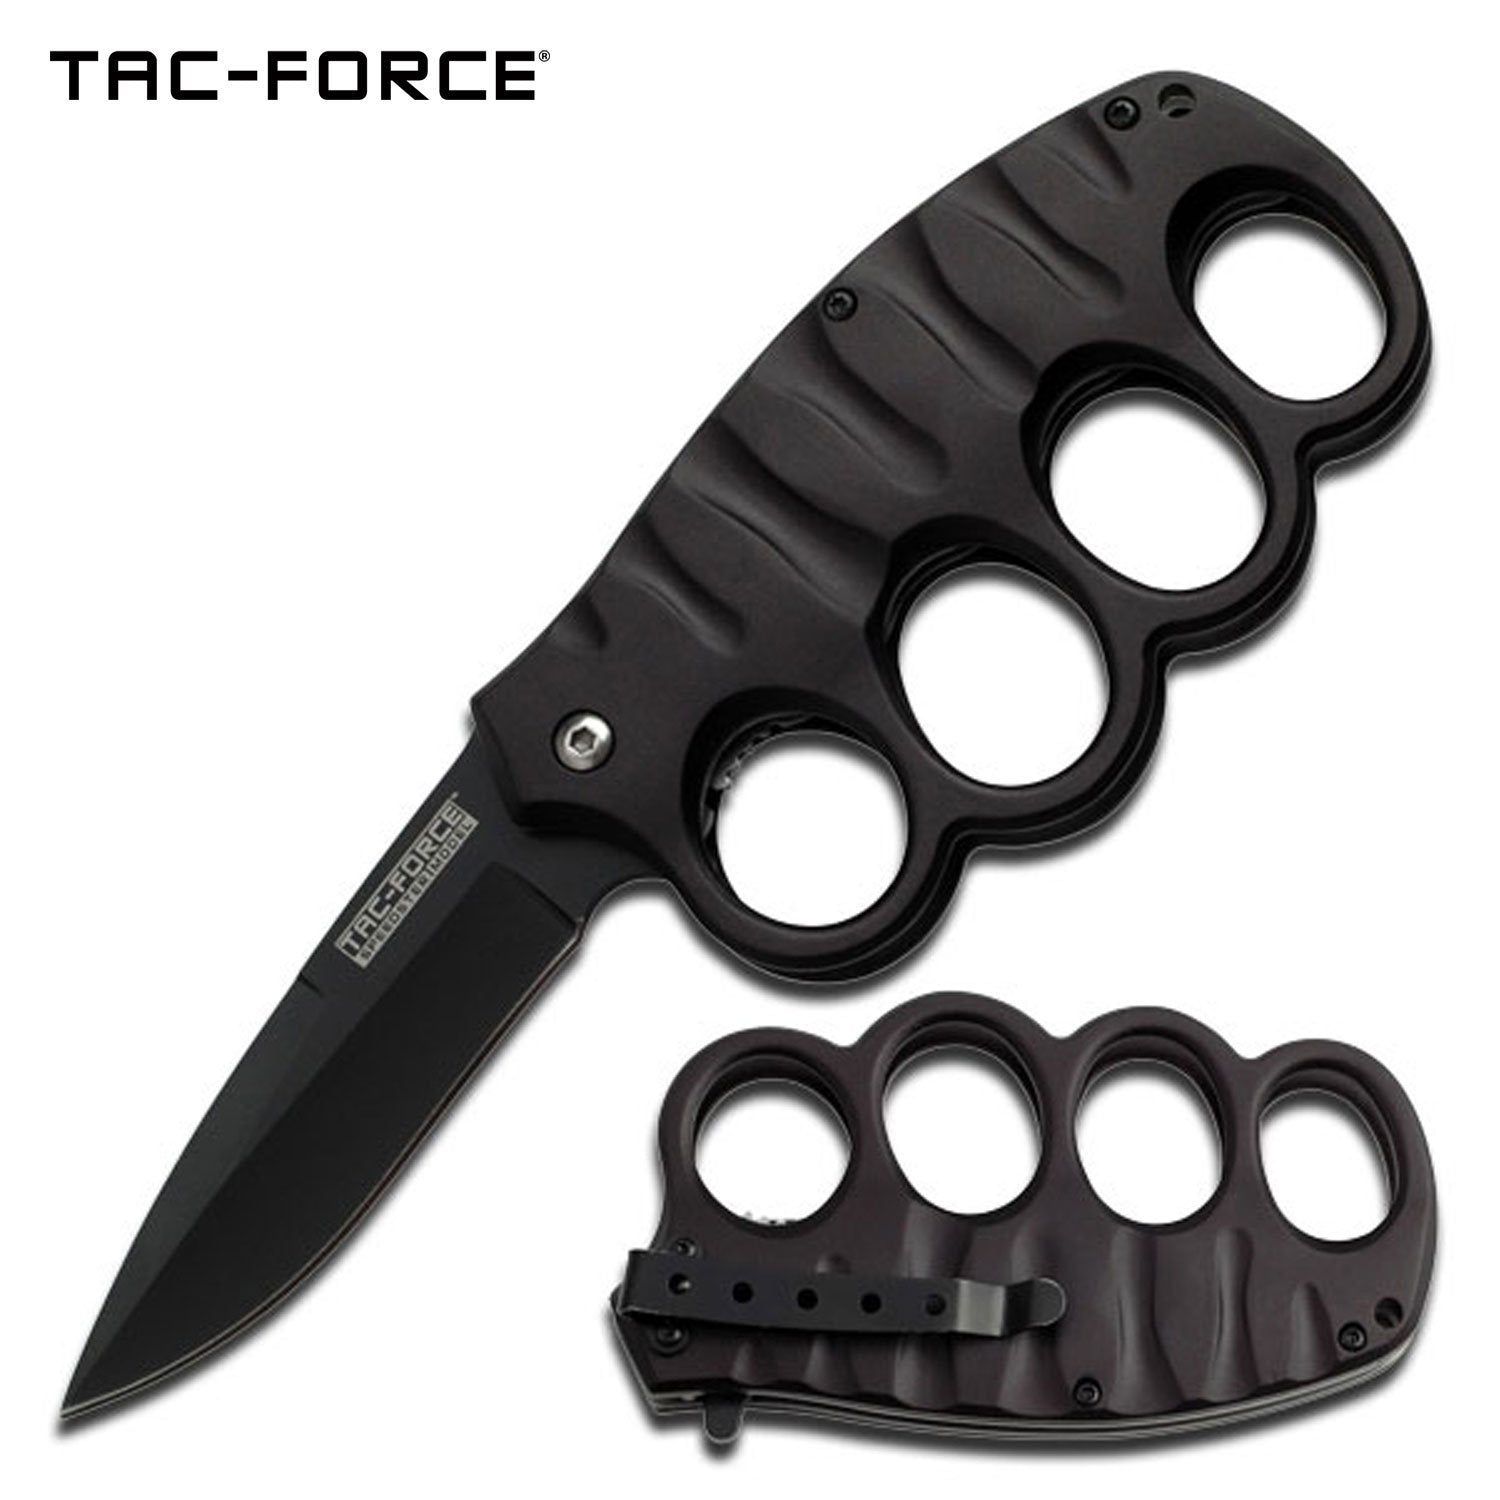 Bellissimo coltello tirapugni TAC-FORCE TF-511 TACTICAL SPRING ASSISTED KNIFE